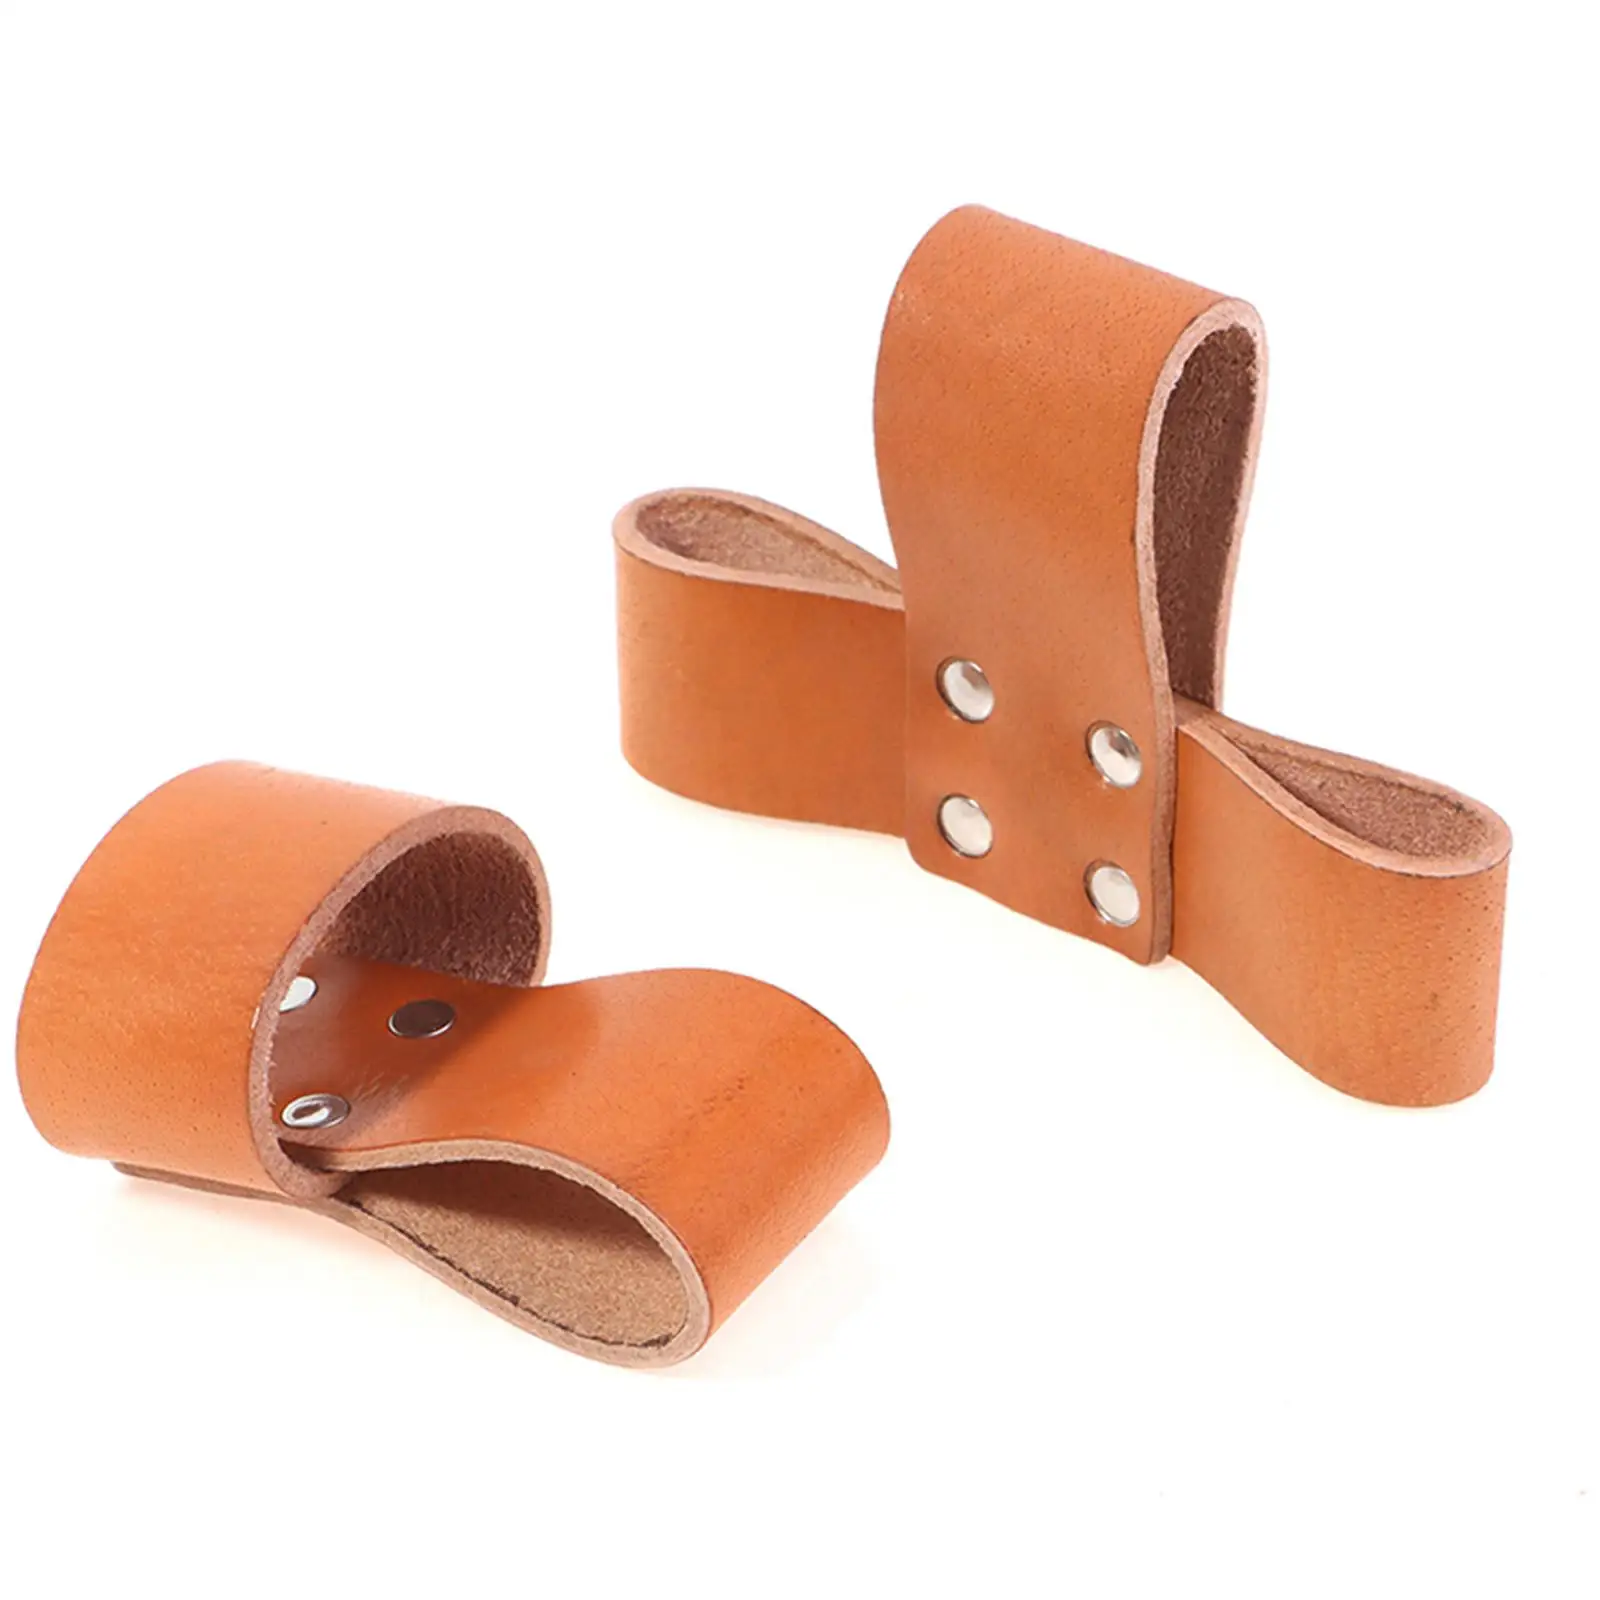 Handmade PU Leather Hammer Holder Open Case Axe Pouch Tool Pocket Axe Belt Loops for Woodwork Handcraft Carpenters Electricians